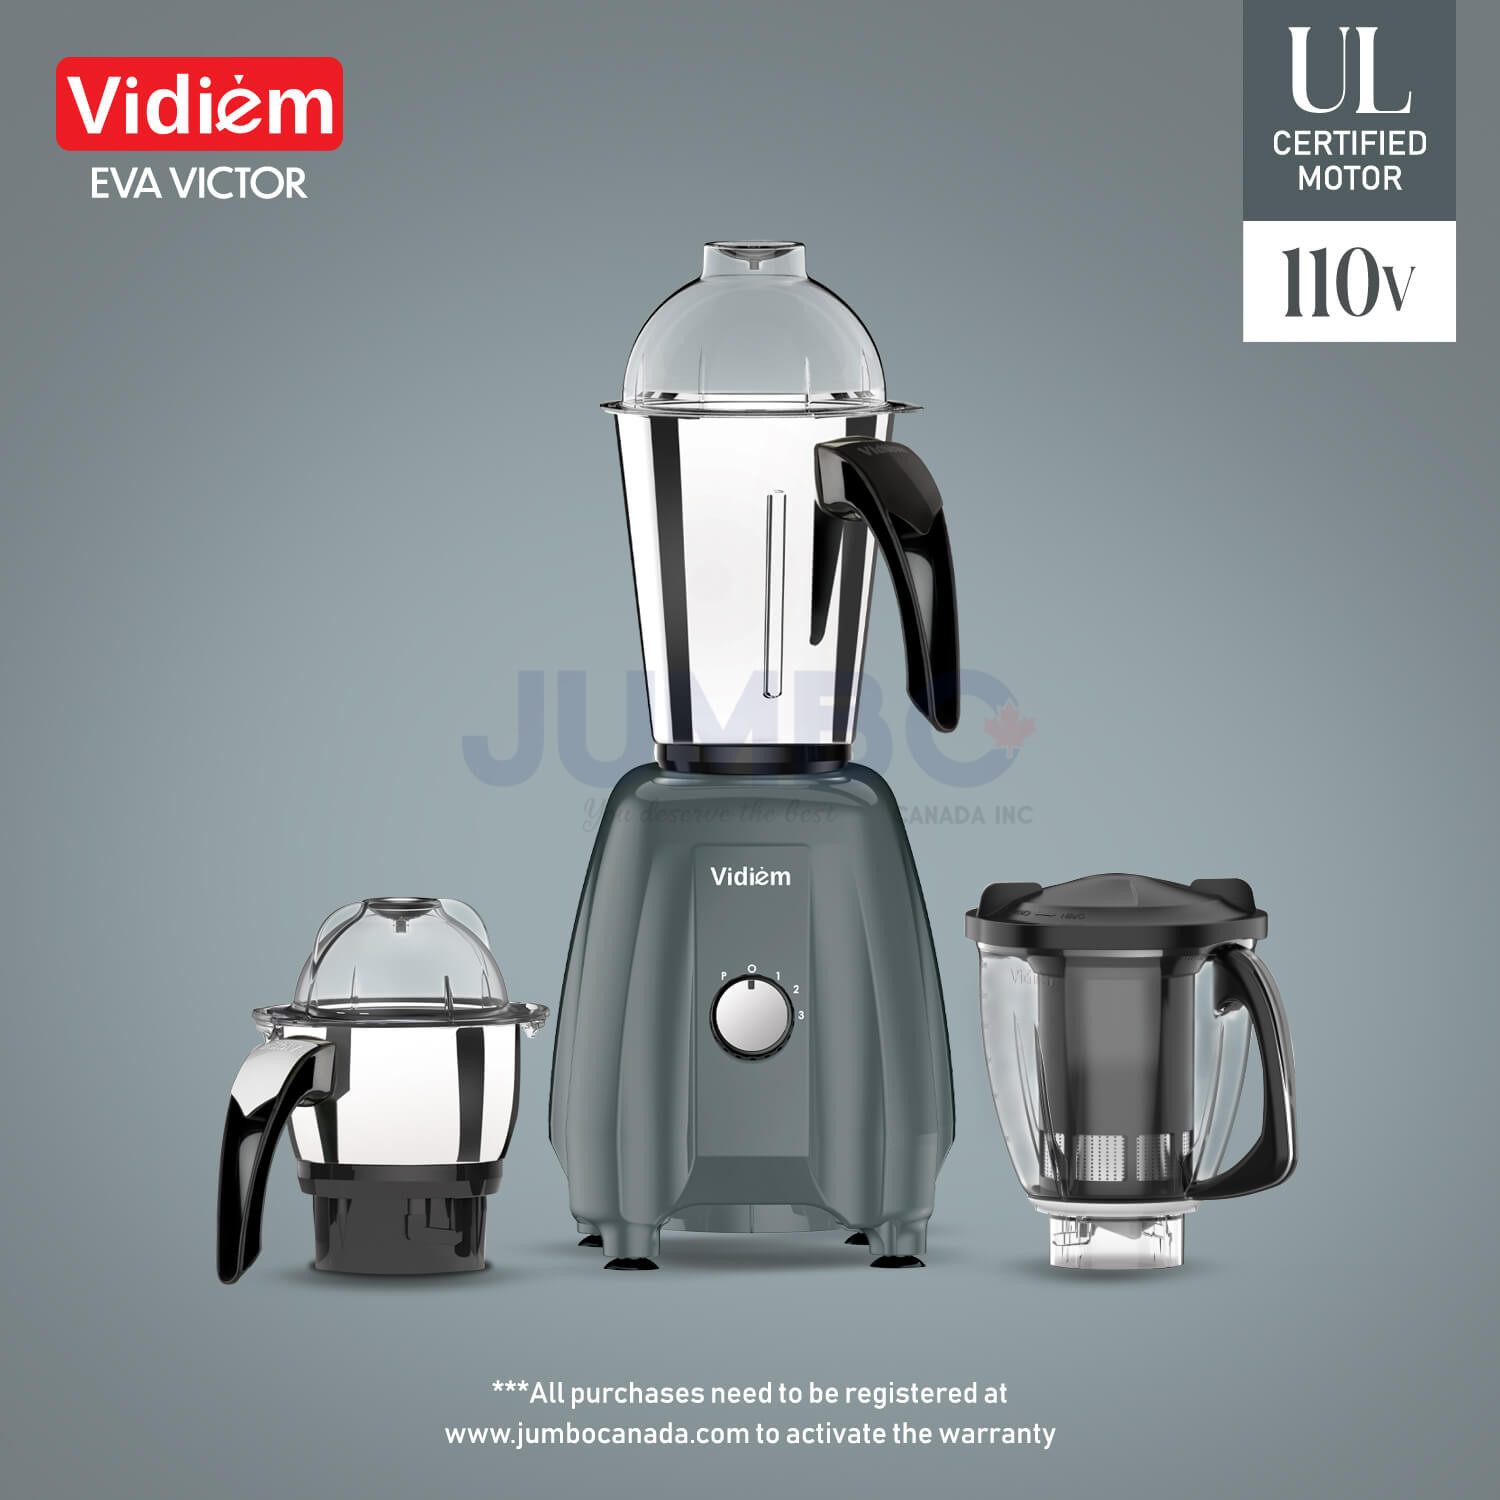 vidiem-eva-victor-650w-110v-stainless-steel-jars-indian-mixer-grinder-spice-coffee-grinder-with-almond-nut-milk-juice-extractor-for-use-in-canada-usa4